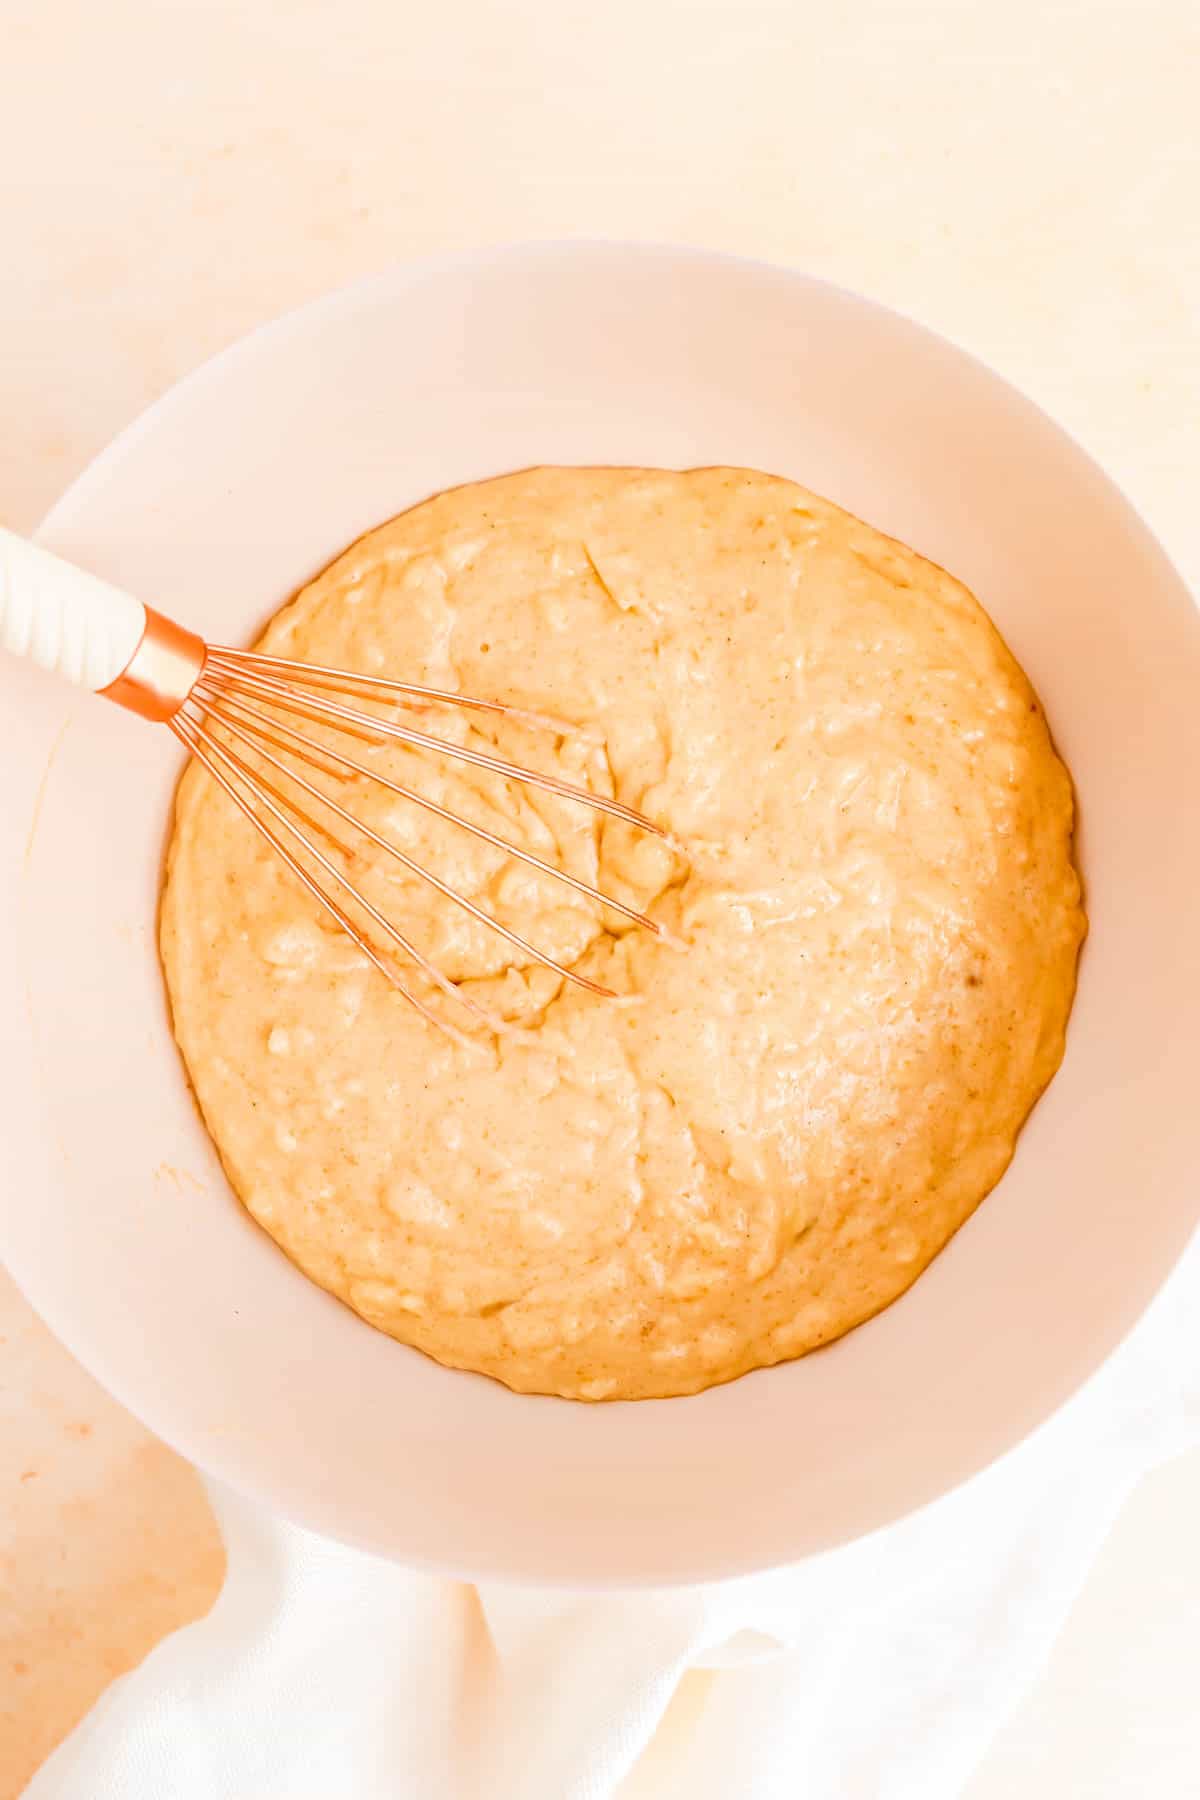 the cake batter base for old fashioned carrot cake in a bowl with a whisk.